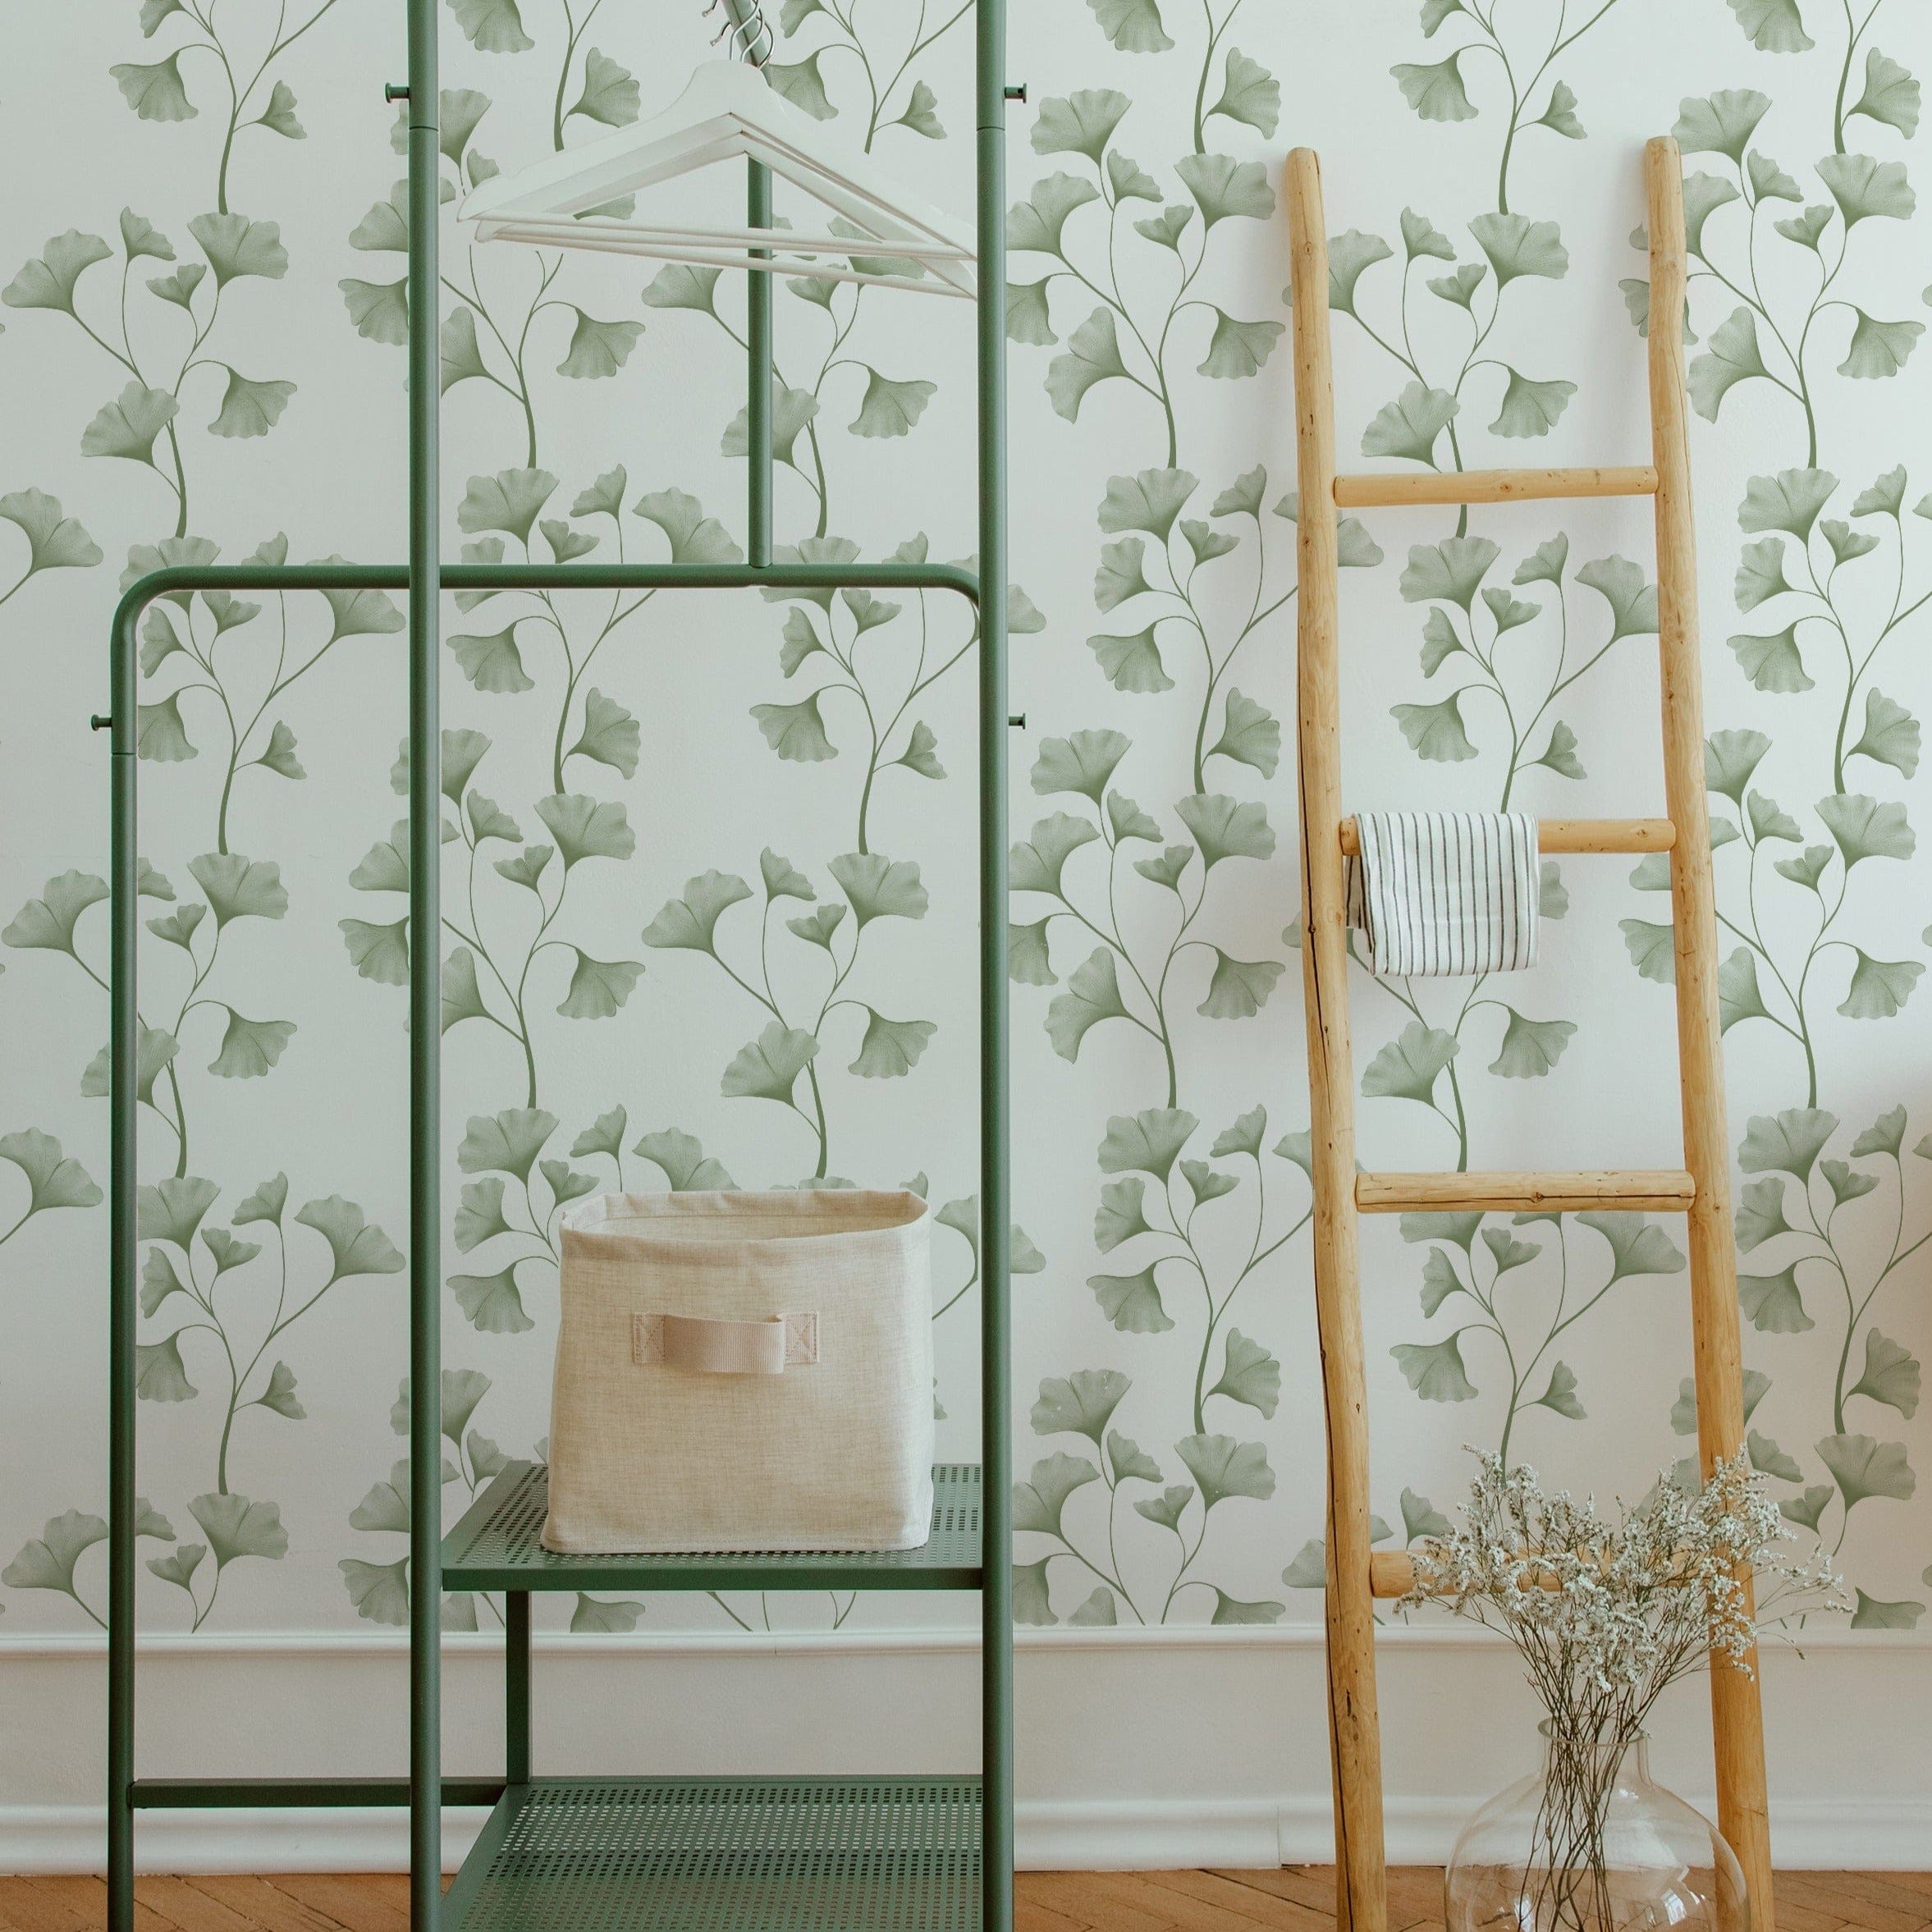 A styled interior scene where the Botanical Vines Wallpaper is used to decorate a bright, airy room. The wallpaper covers the walls behind a modern green metal shelving unit and a wooden ladder, both adorned with neutral-toned decor items, contributing to a refreshing and organic atmosphere.